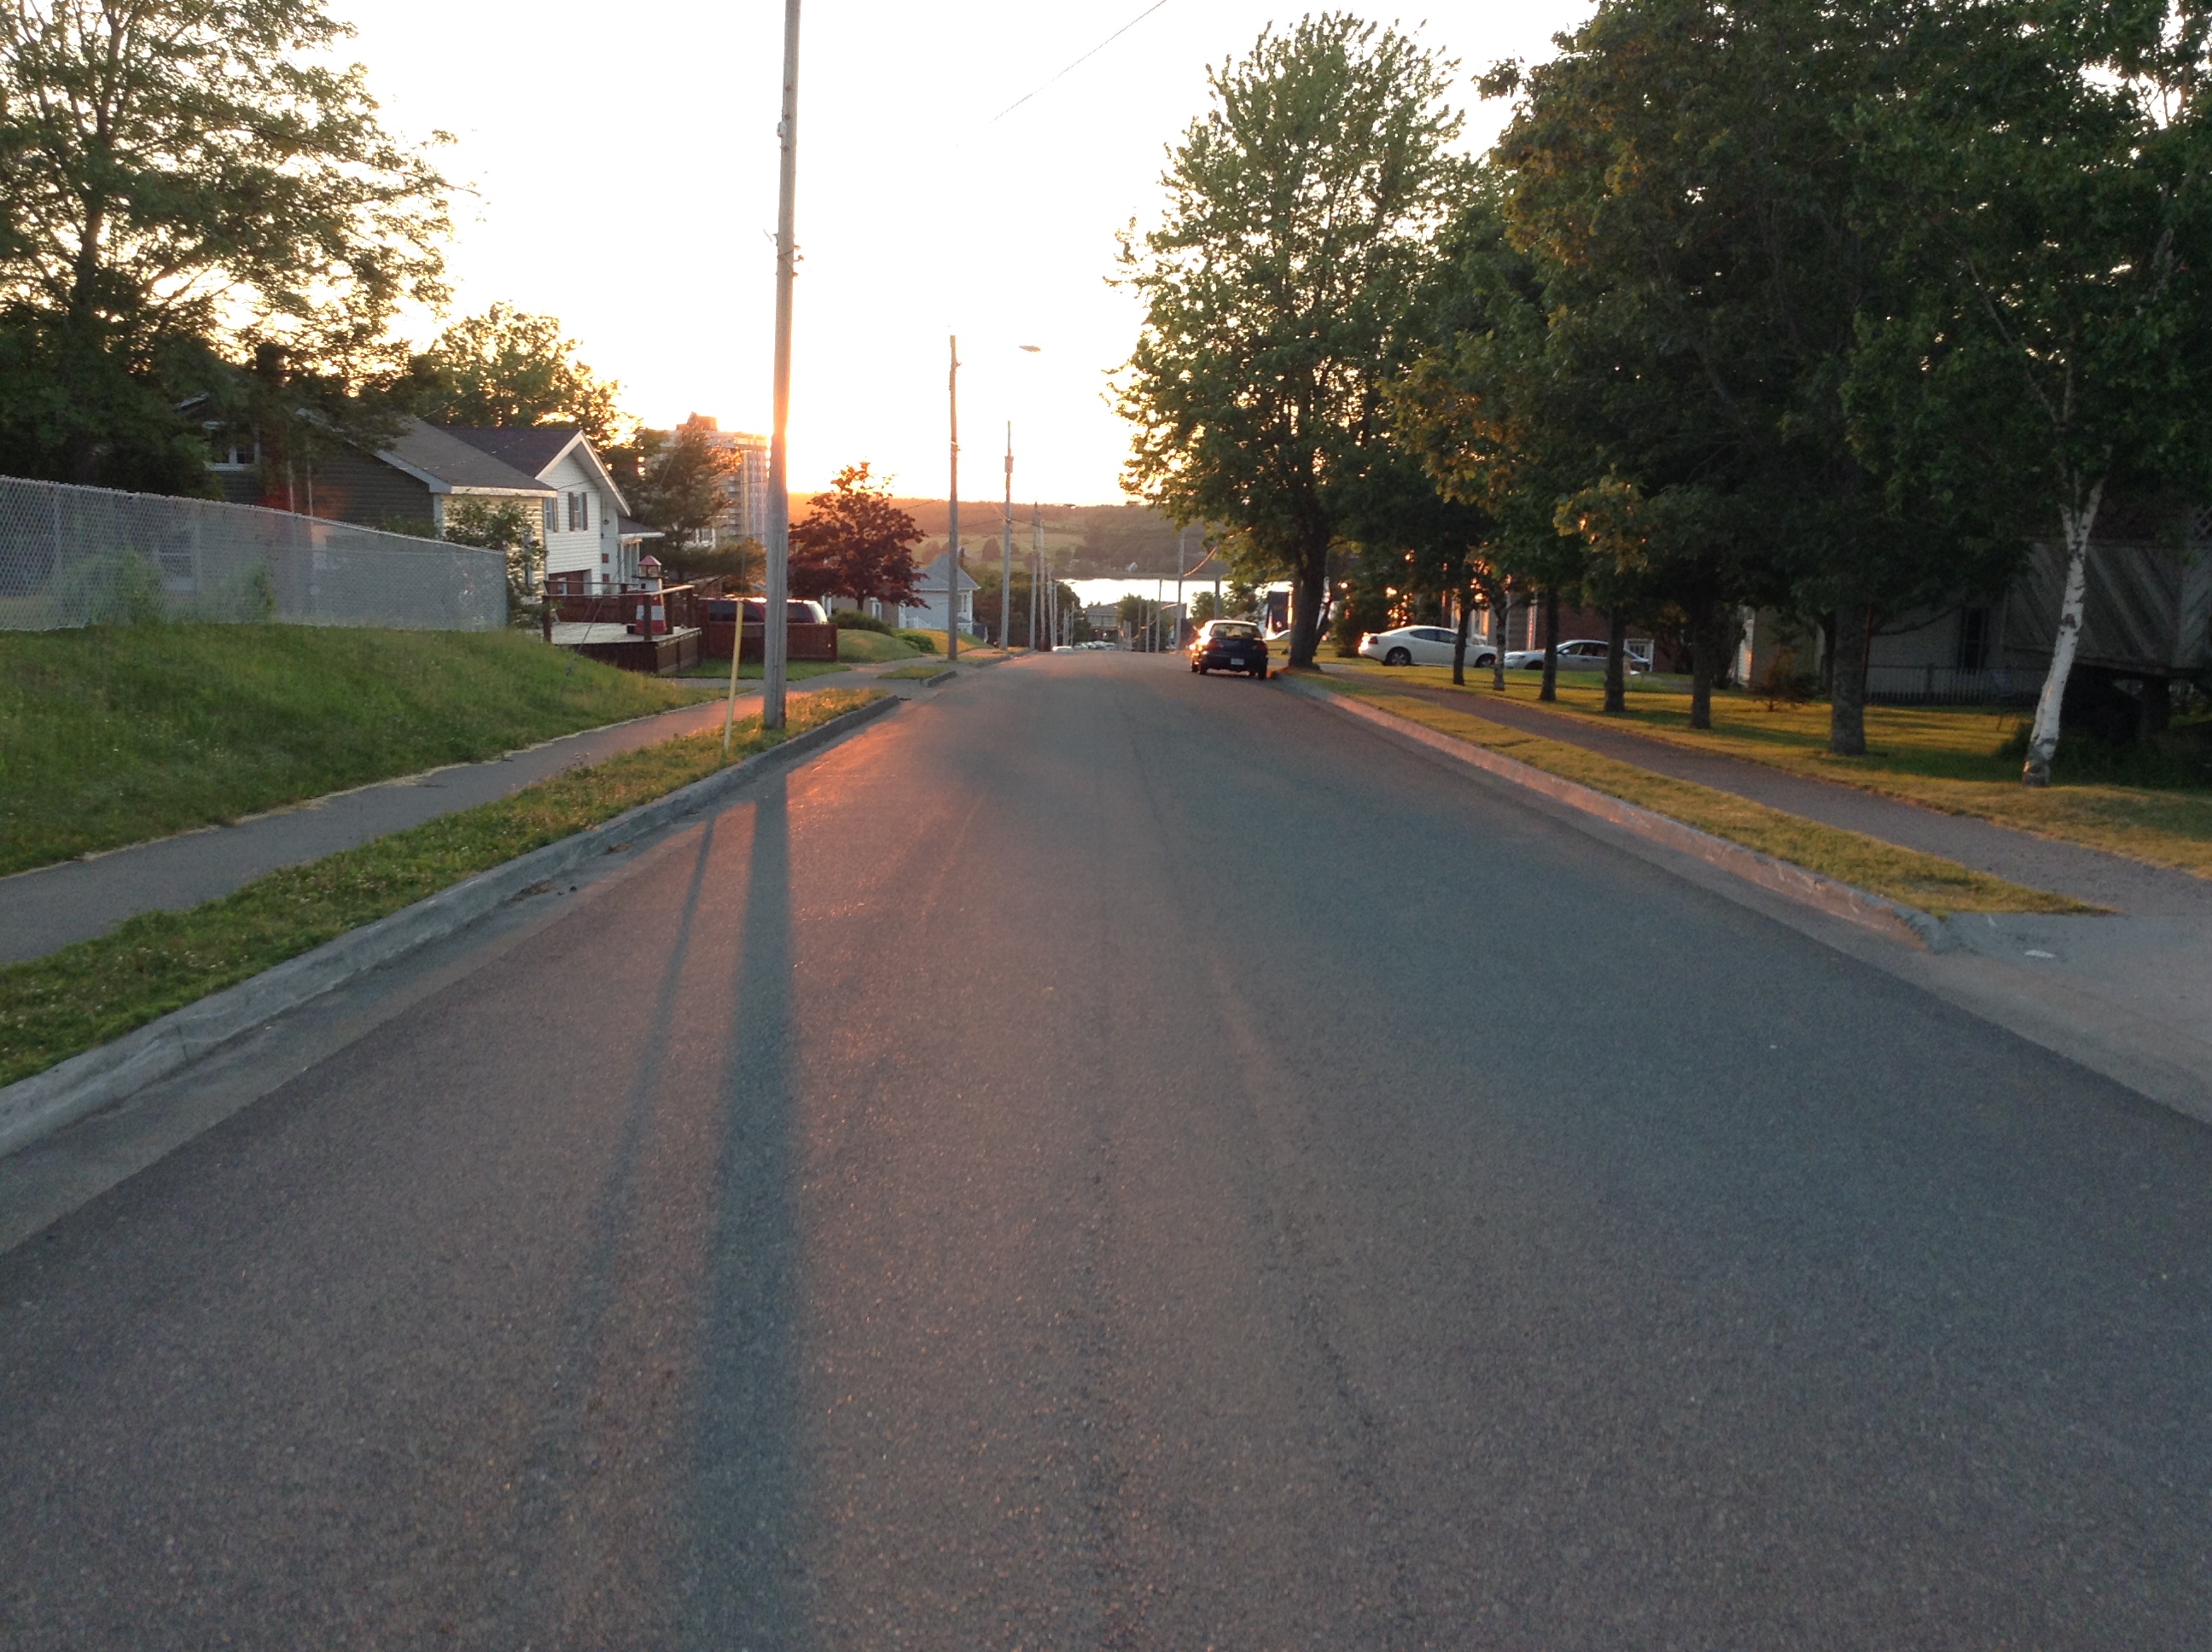 Castle Drive is One of the Side Streets that Connects From Alexandra Street to Kings Road and it is Heading Downhill during the Sunset.